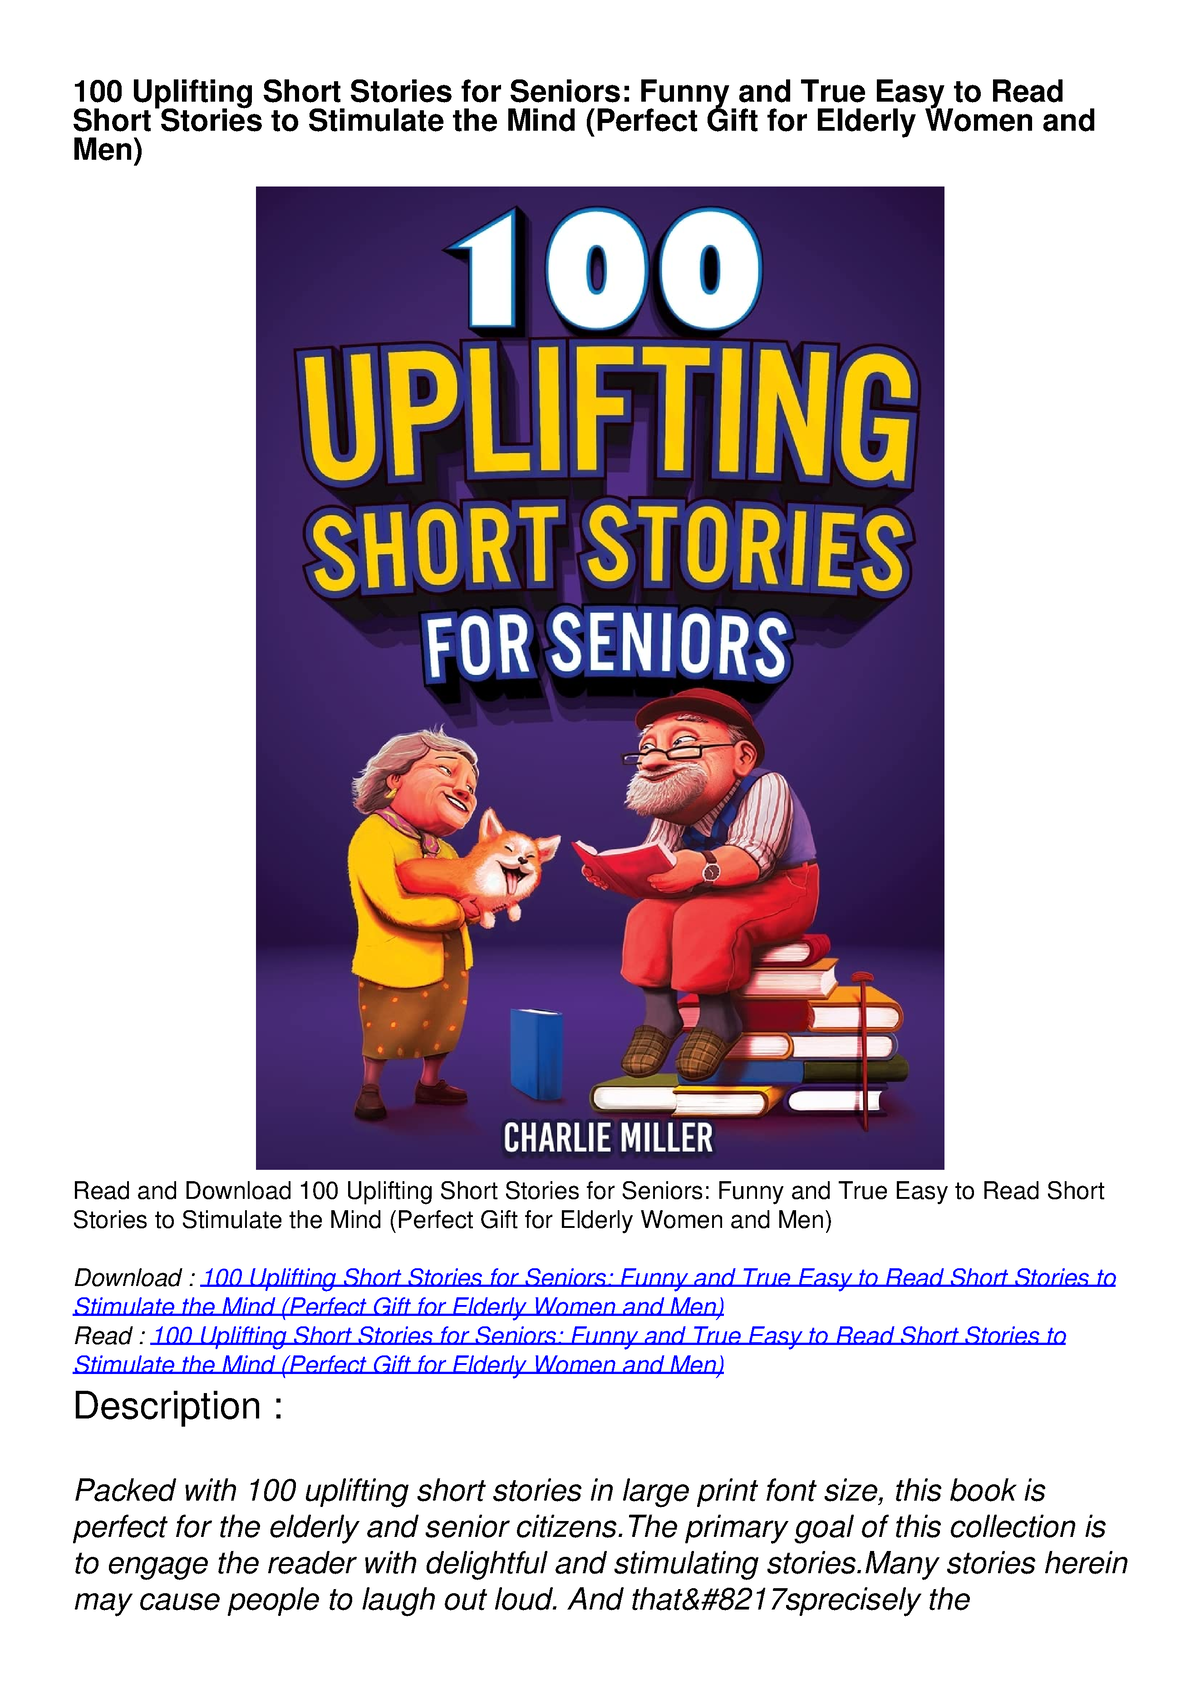 download-pdf-100-uplifting-short-stories-for-seniors-funny-and-true